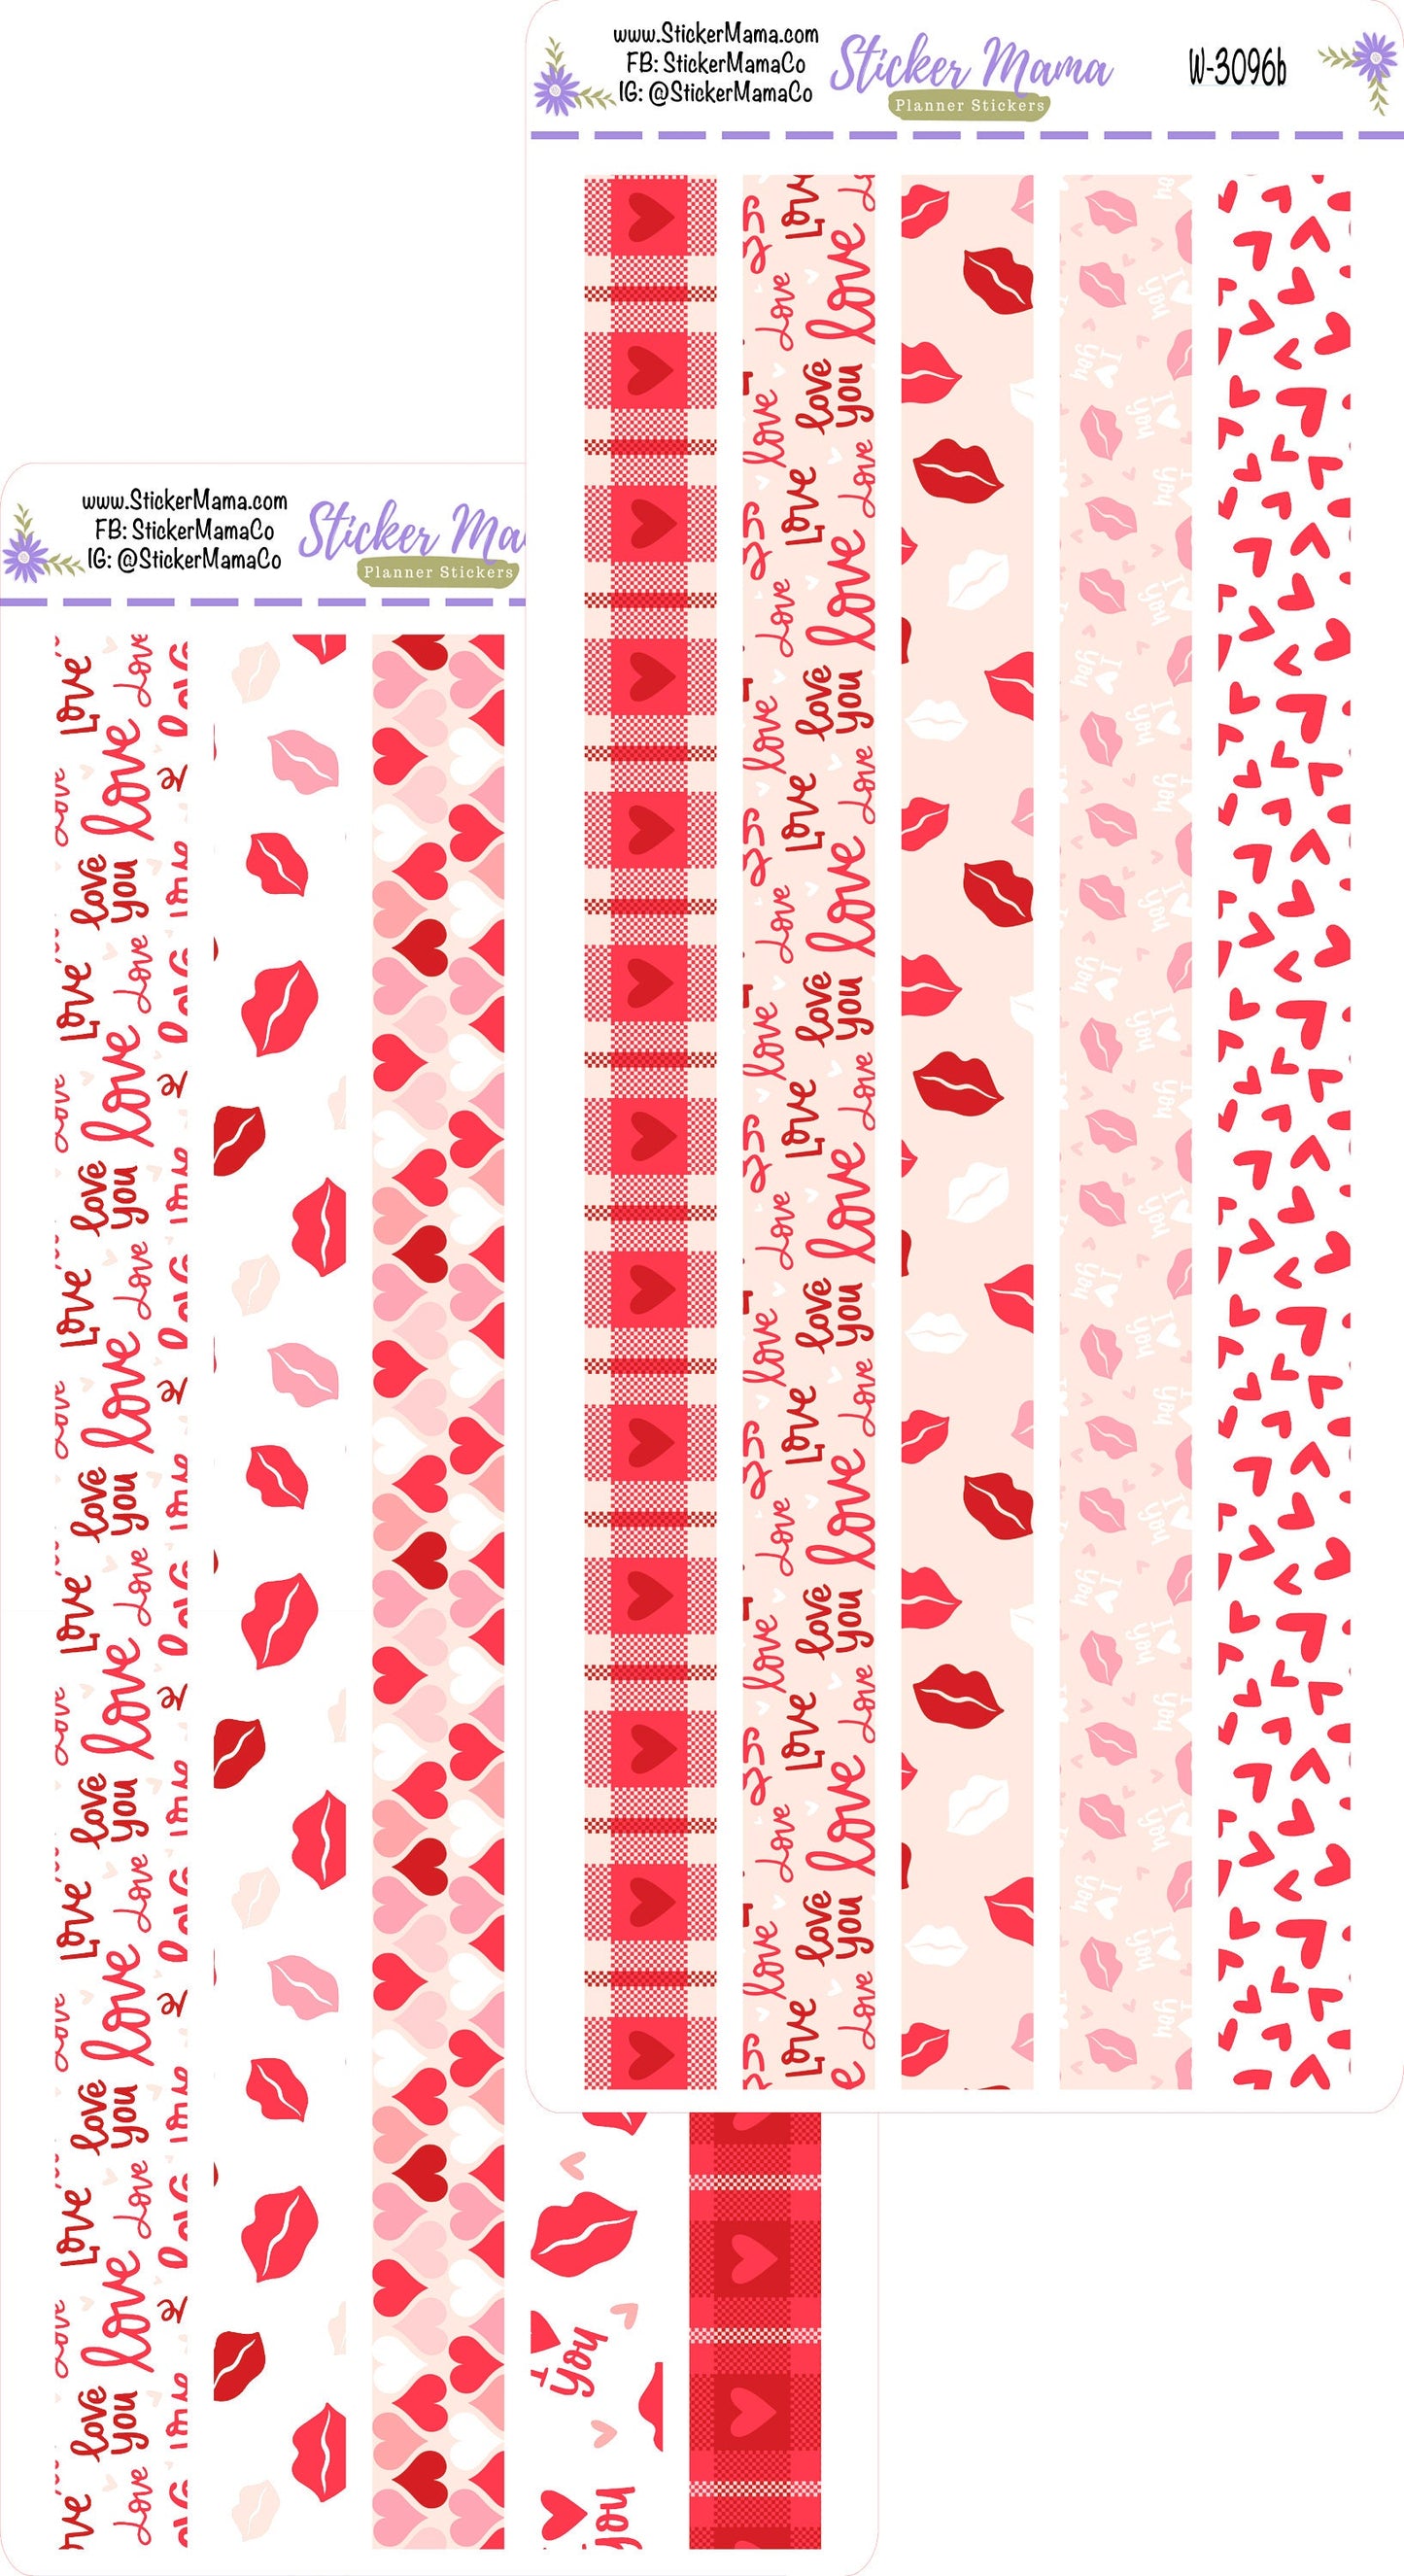 W-3096- Hearts 'n Kisses Washi Stickers || Planner Stickers || Washi for Planners